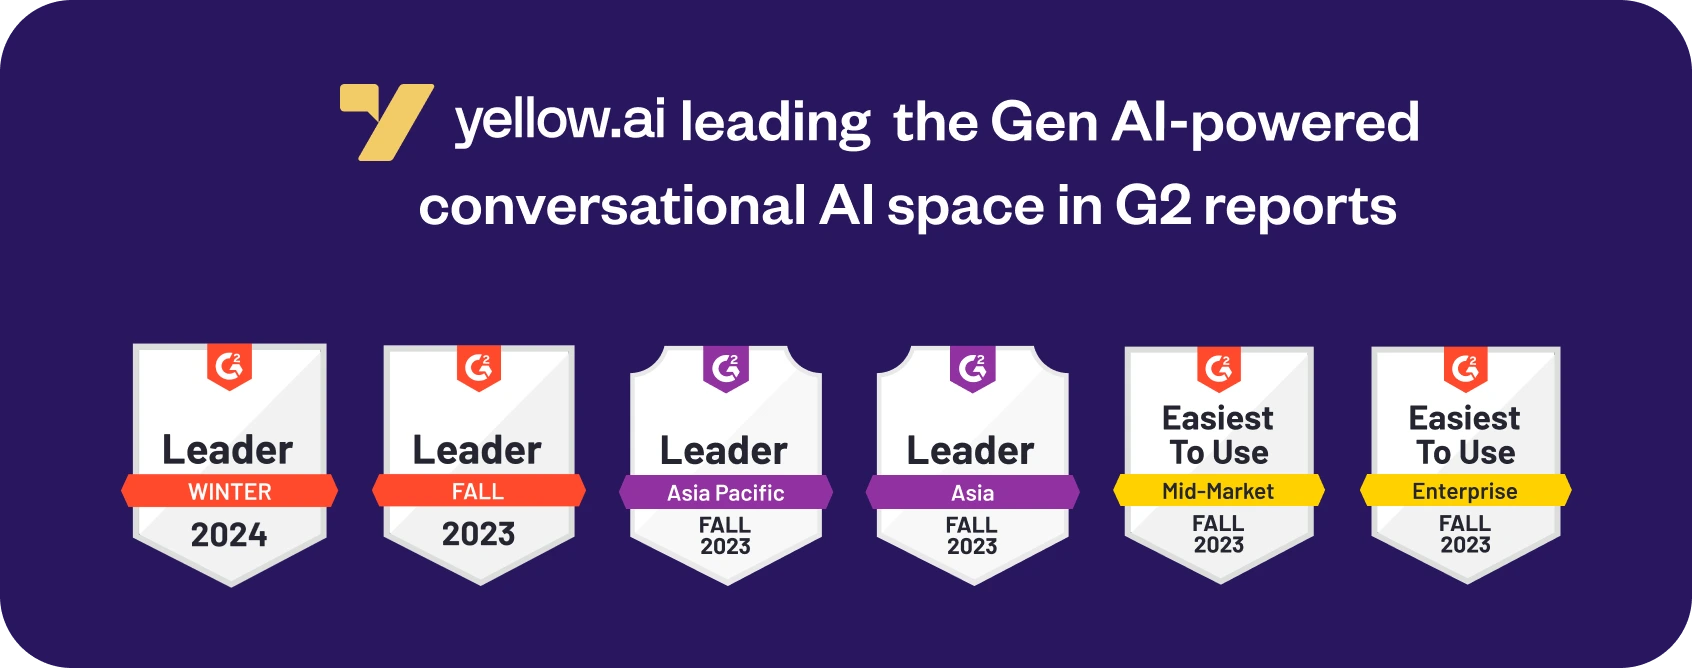 Yellow.ai - leading the gen-ai powered conversational AI space in G2 reports